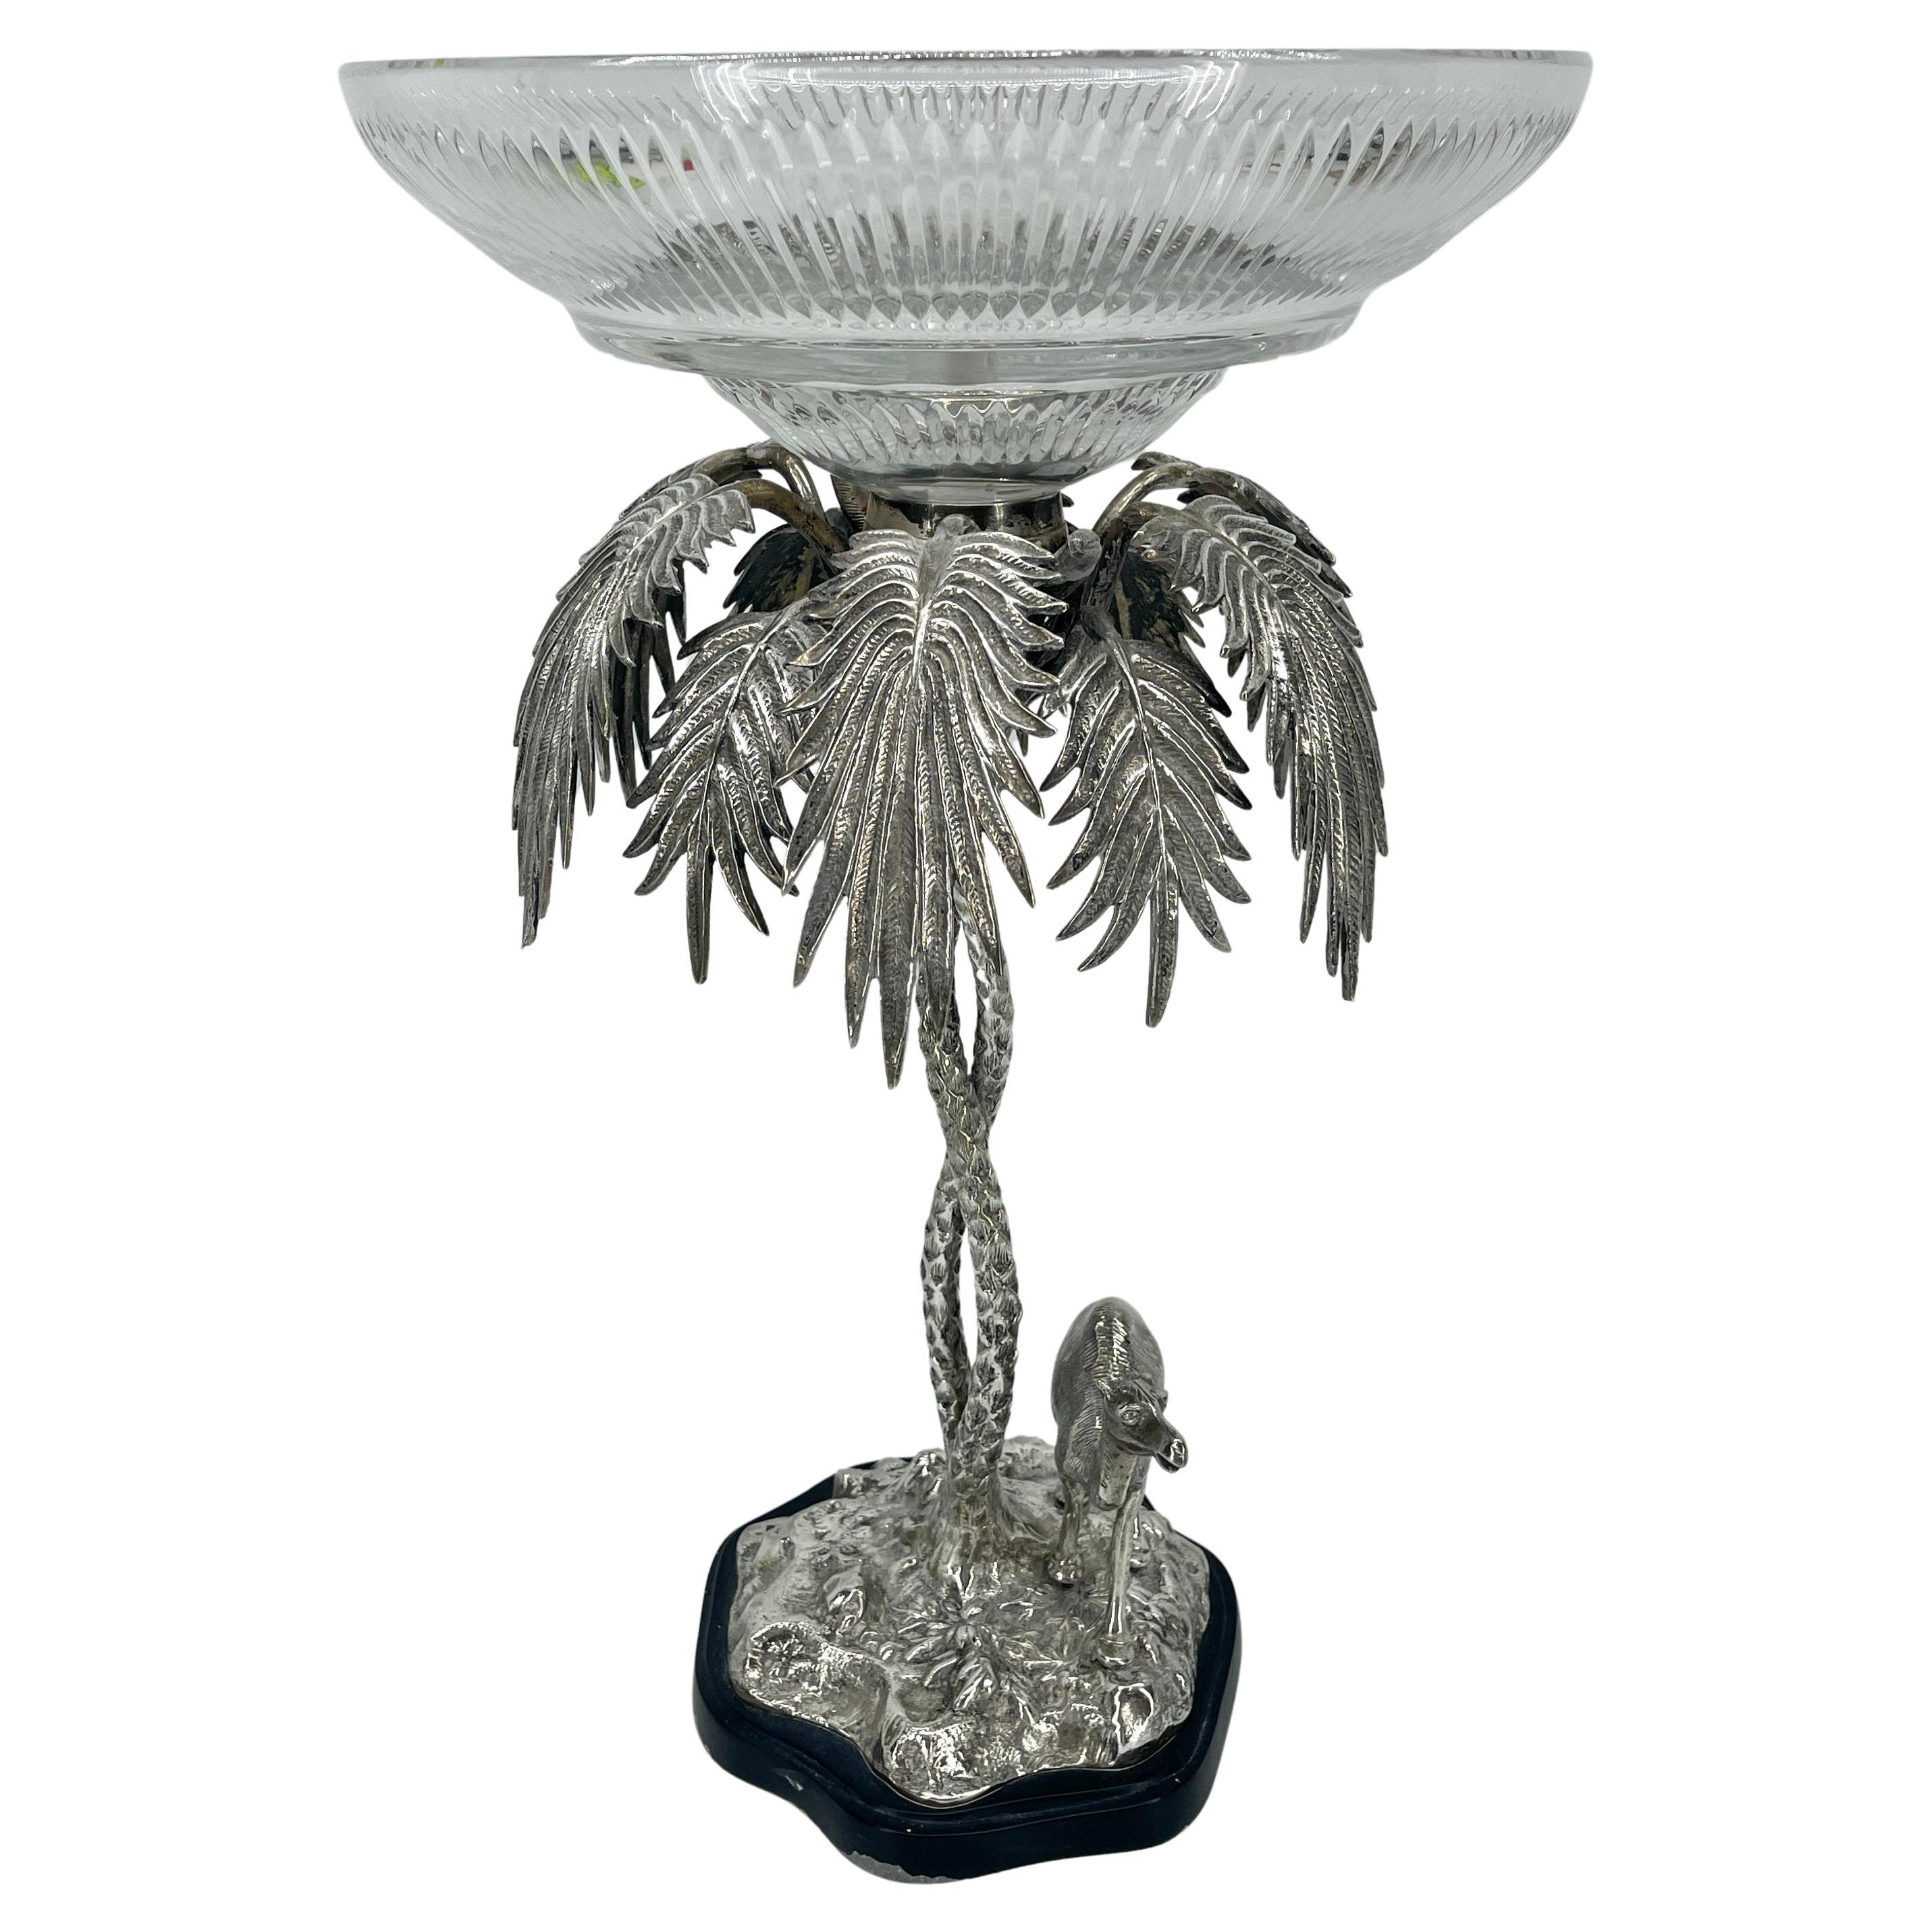 Silver Plate Large Elkington Epergne Centerpiece With Camel, Palm Tree and Glass Bowl For Sale